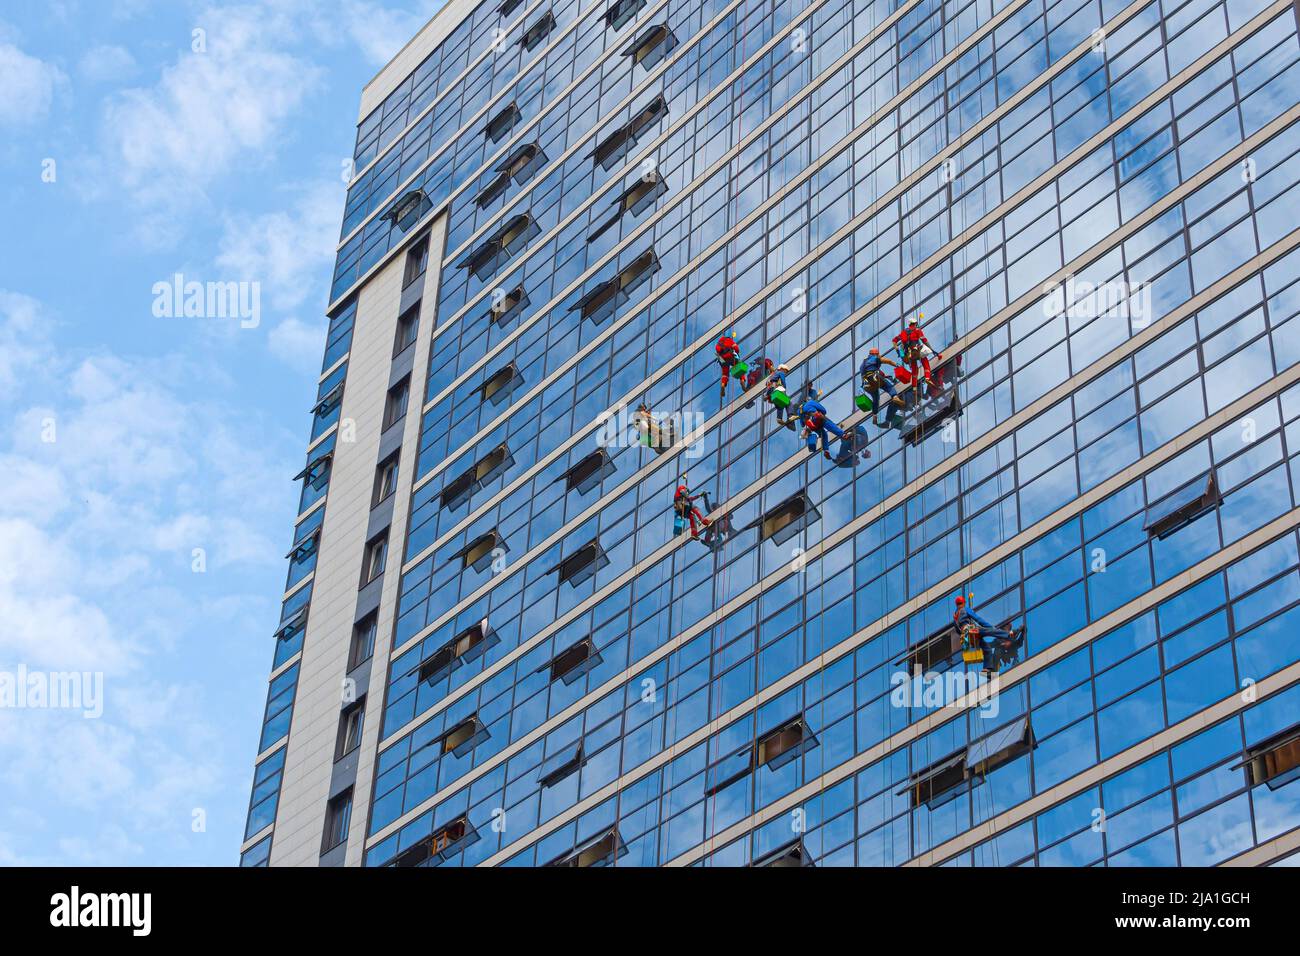 Premium Photo  Window cleaning in high-rise buildings, houses with a brush.  window cleaning brush. large window in a multi-storey building, cleaning  service. dust removal and glass washing.